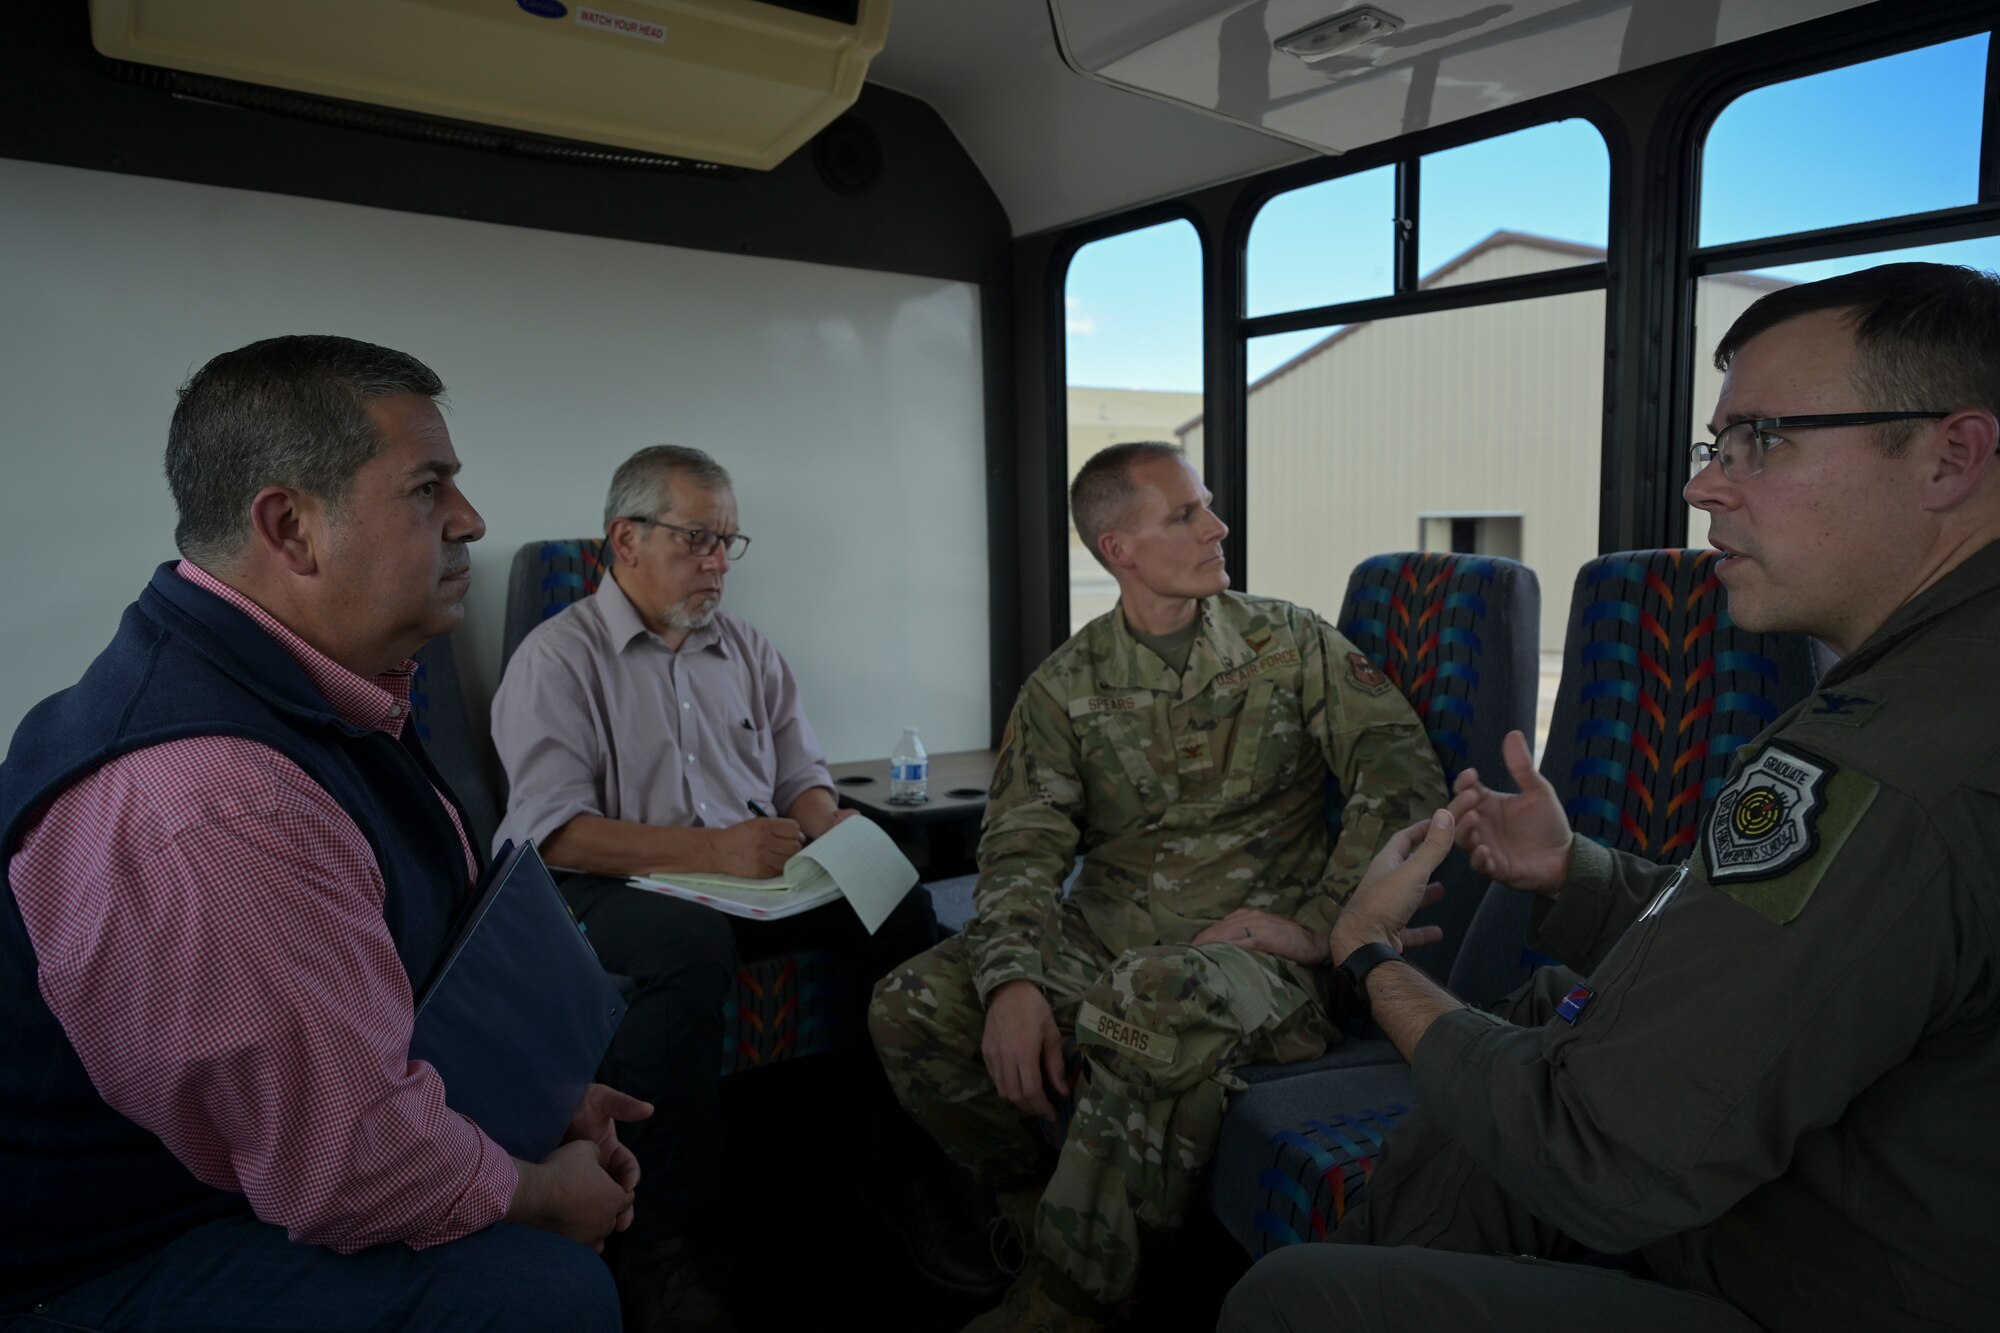 Sen. Ben Ray Lujan, of New Mexico, receives a brief from Col. Nicholas Pederson, 49th Wing vice commander, on the production of an MQ-9 campus on Holloman Air Force Base, New Mexico, August 15, 2022. The 49th Wing builds the backbone of combat airpower by training combat-ready MQ-9 Reaper pilots and sensor operators. (U.S. Air Force photo by Airman 1st Class Antonio Salfran)